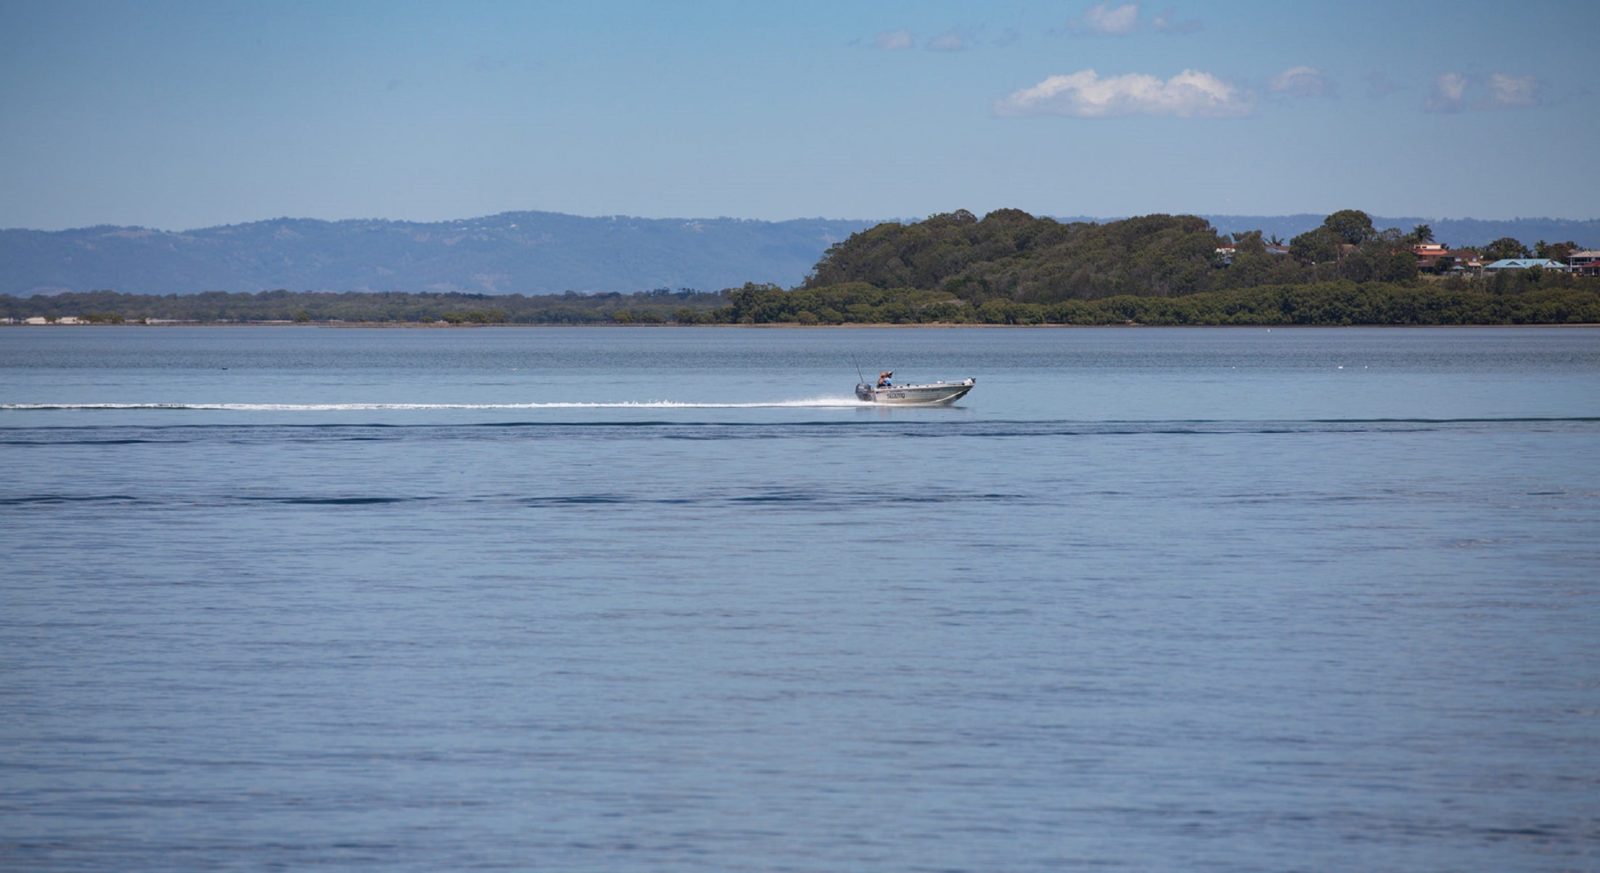 Tinny gliding gliding over the water in Pumicestone Passage